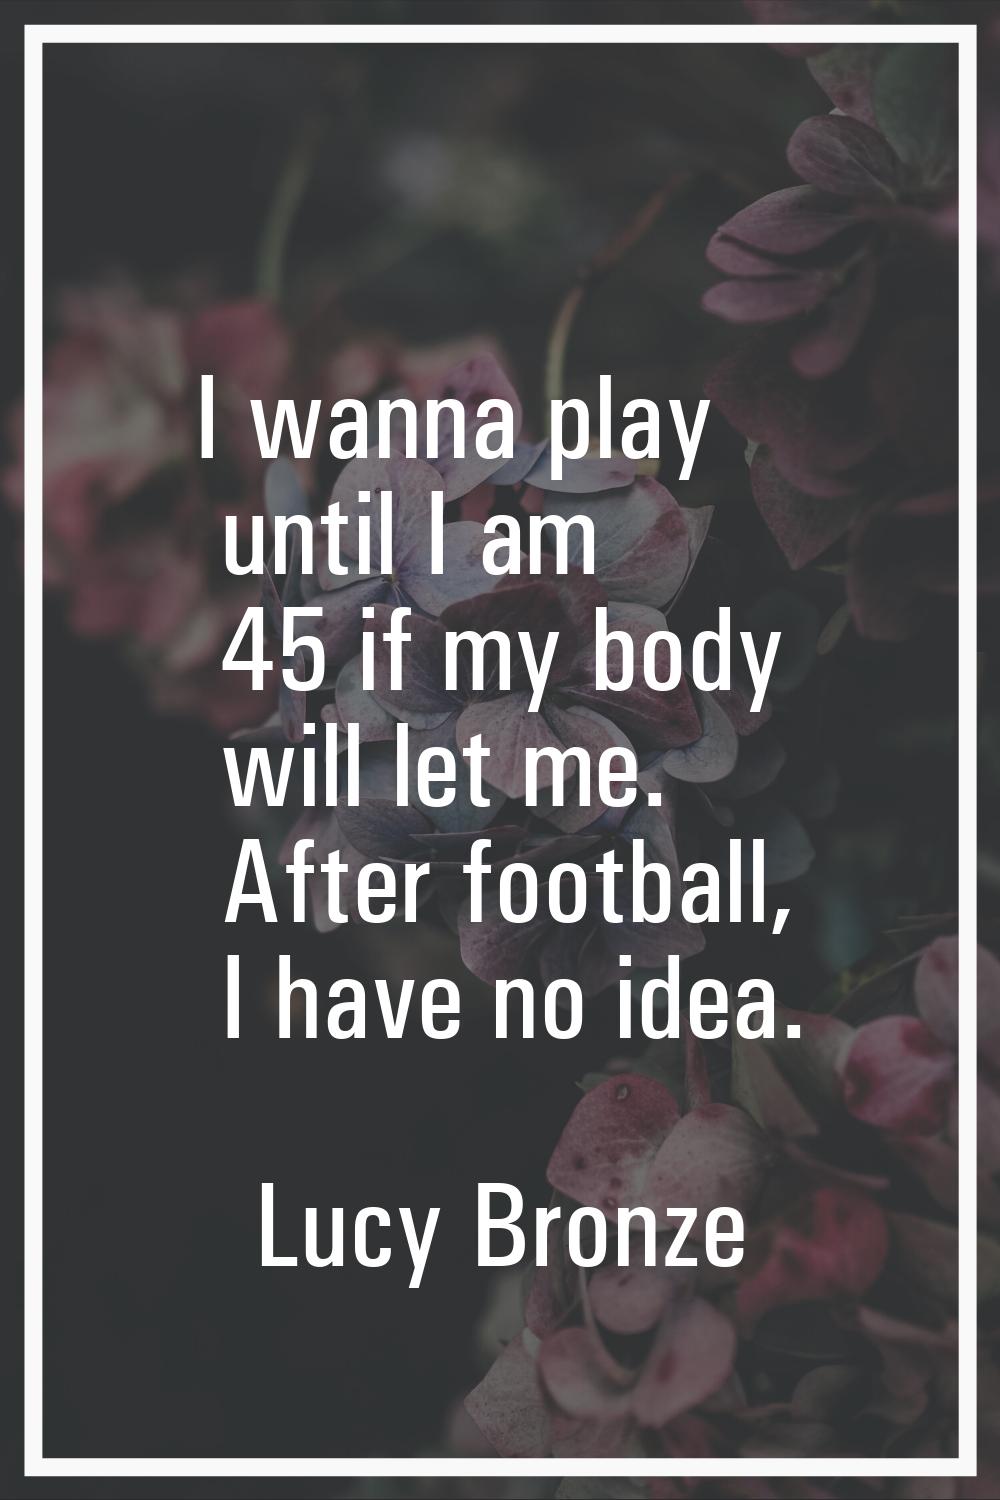 I wanna play until I am 45 if my body will let me. After football, I have no idea.